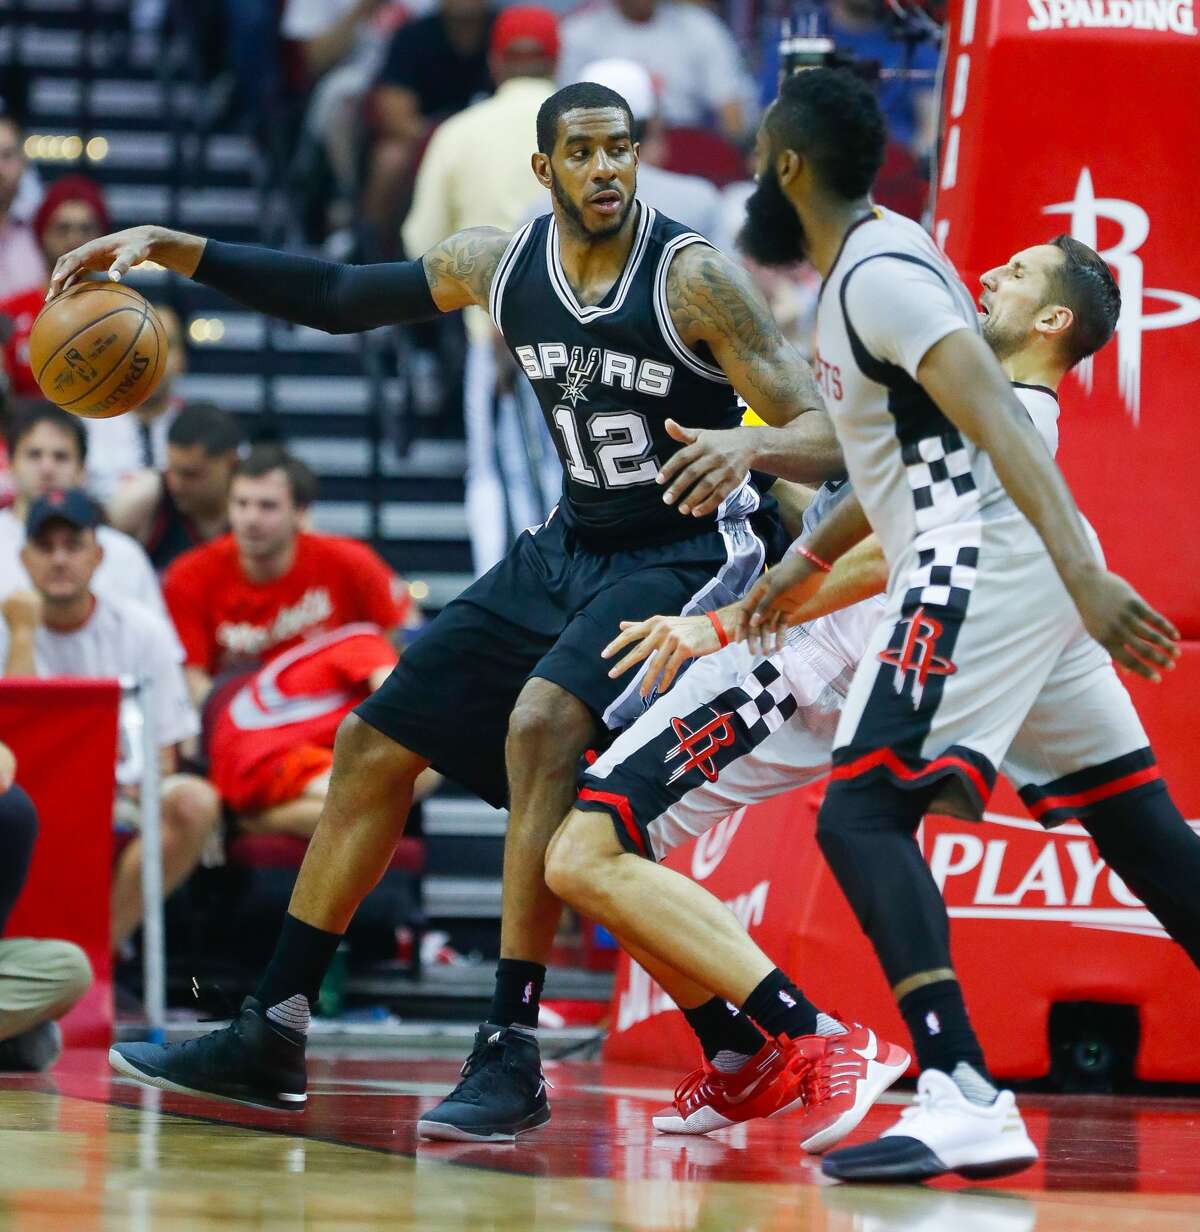 San Antonio Spurs forward LaMarcus Aldridge (12) backs into Houston Rockets forward Ryan Anderson (3) during the first half of Game 3 of the second round of the Western Conference NBA playoffs at the Toyota Center, Sunday, May 7, 2017, in Houston. ( Karen Warren / Houston Chronicle )